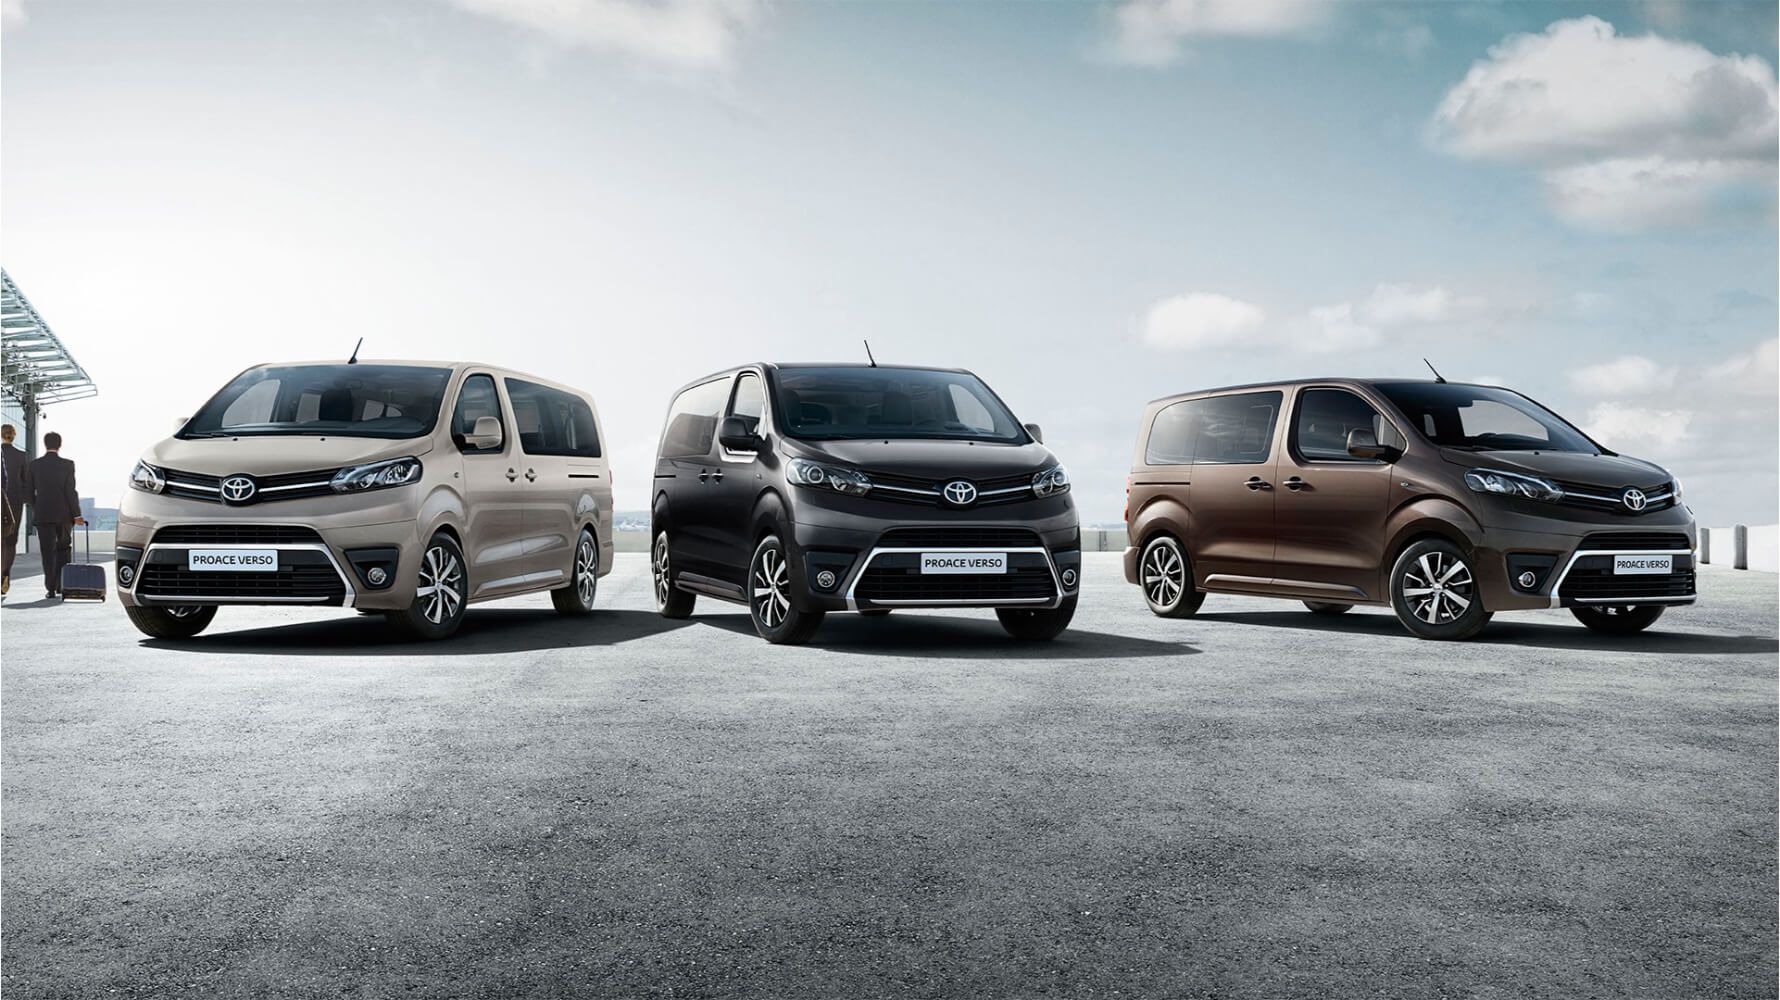 toyota_proace_verso_2019_gallery_002_full_tcm_3046_1703760